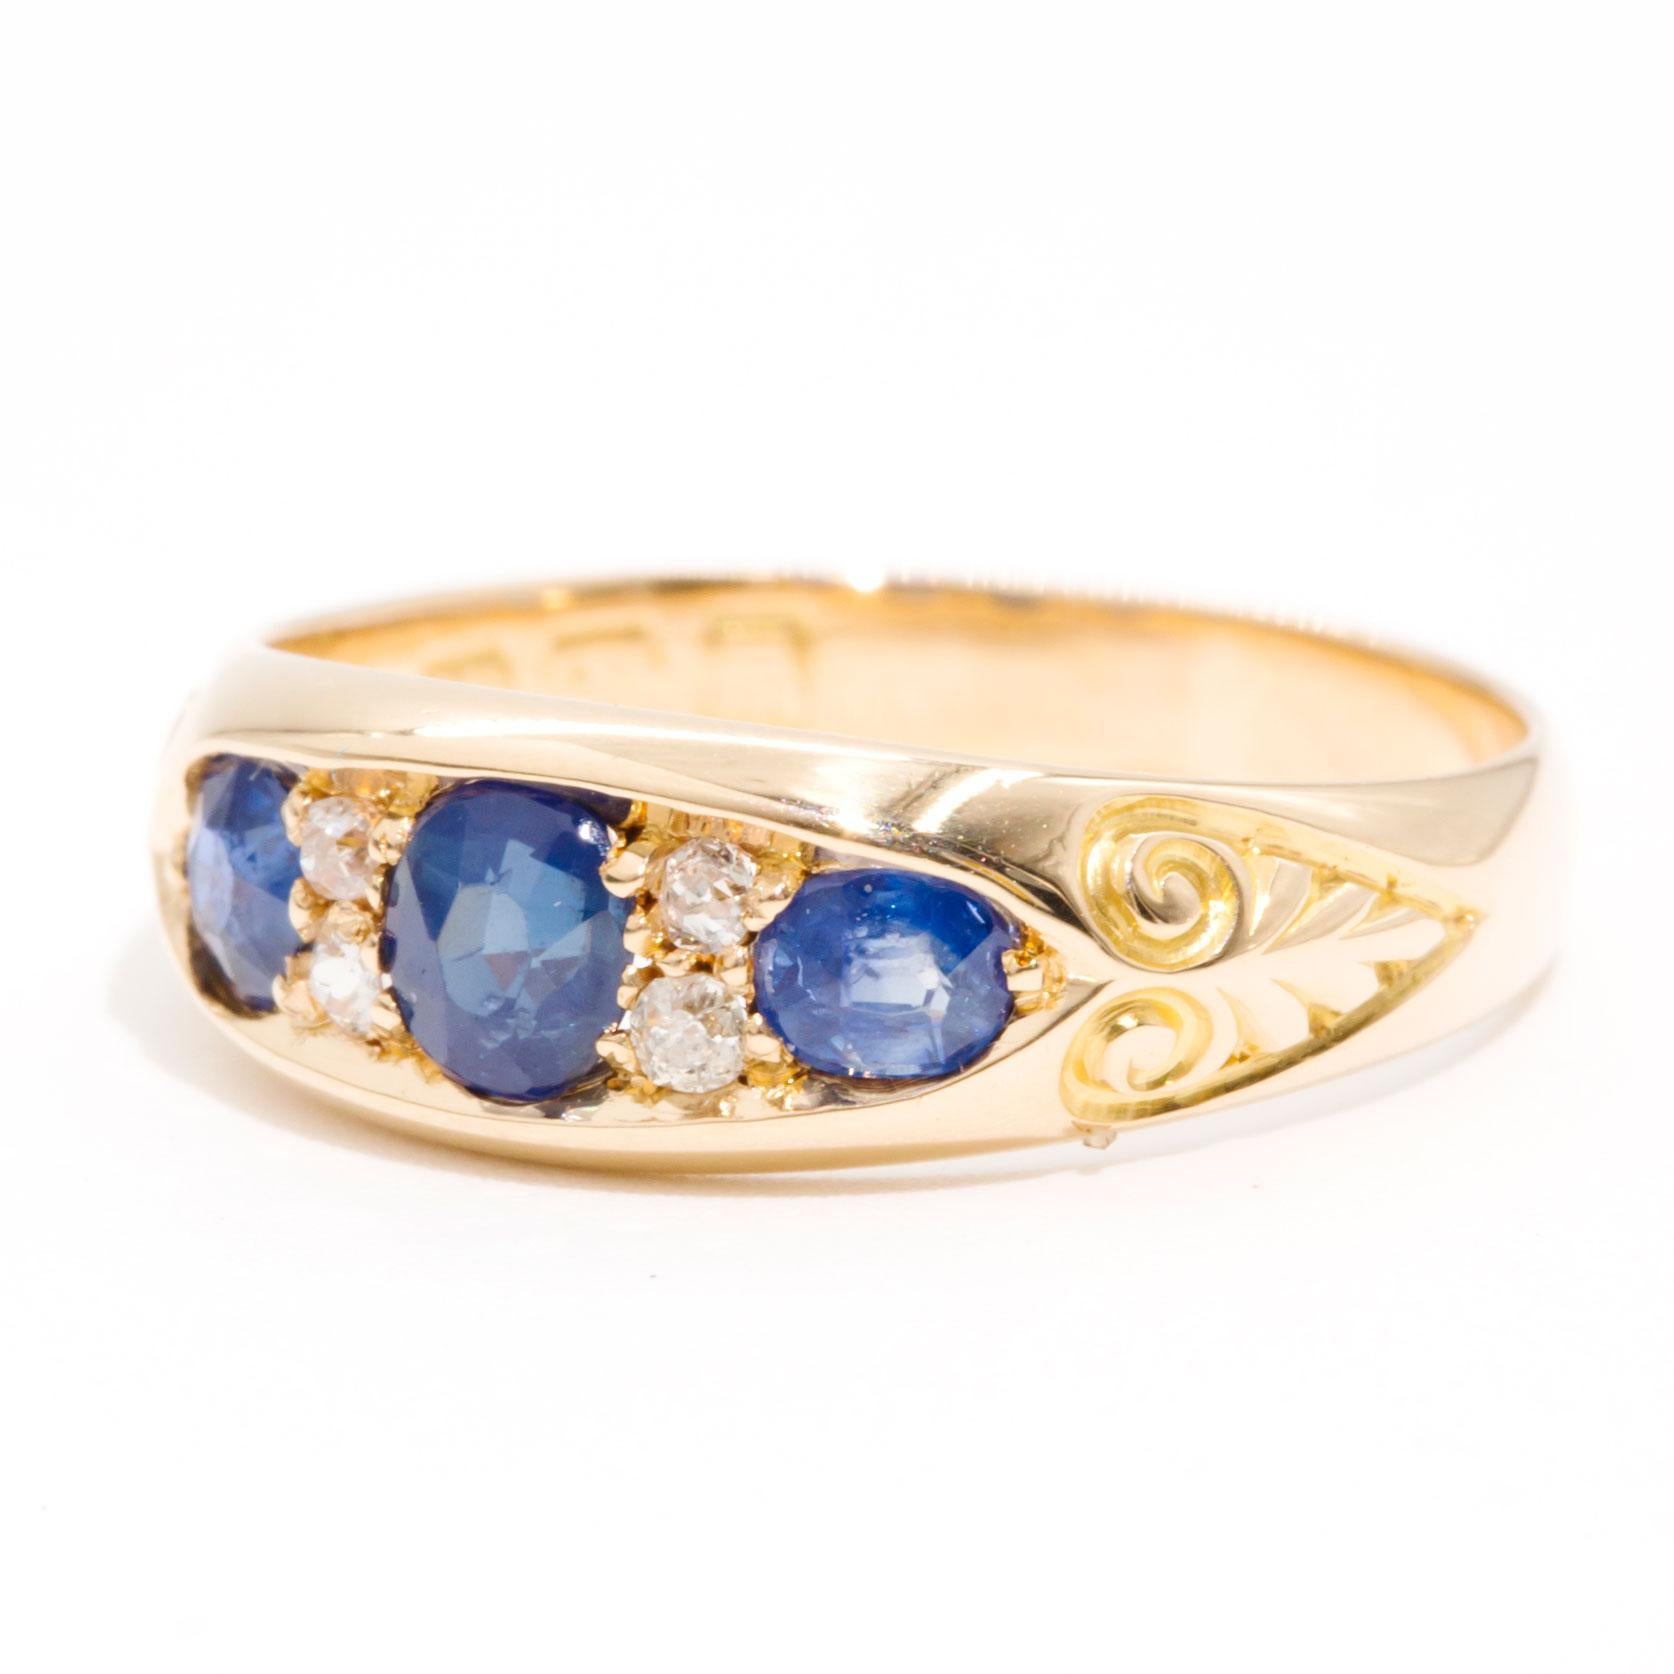 Old European Cut Diamond and Blue Sapphire 18 Carat Yellow Gold Vintage Ring  For Sale 4